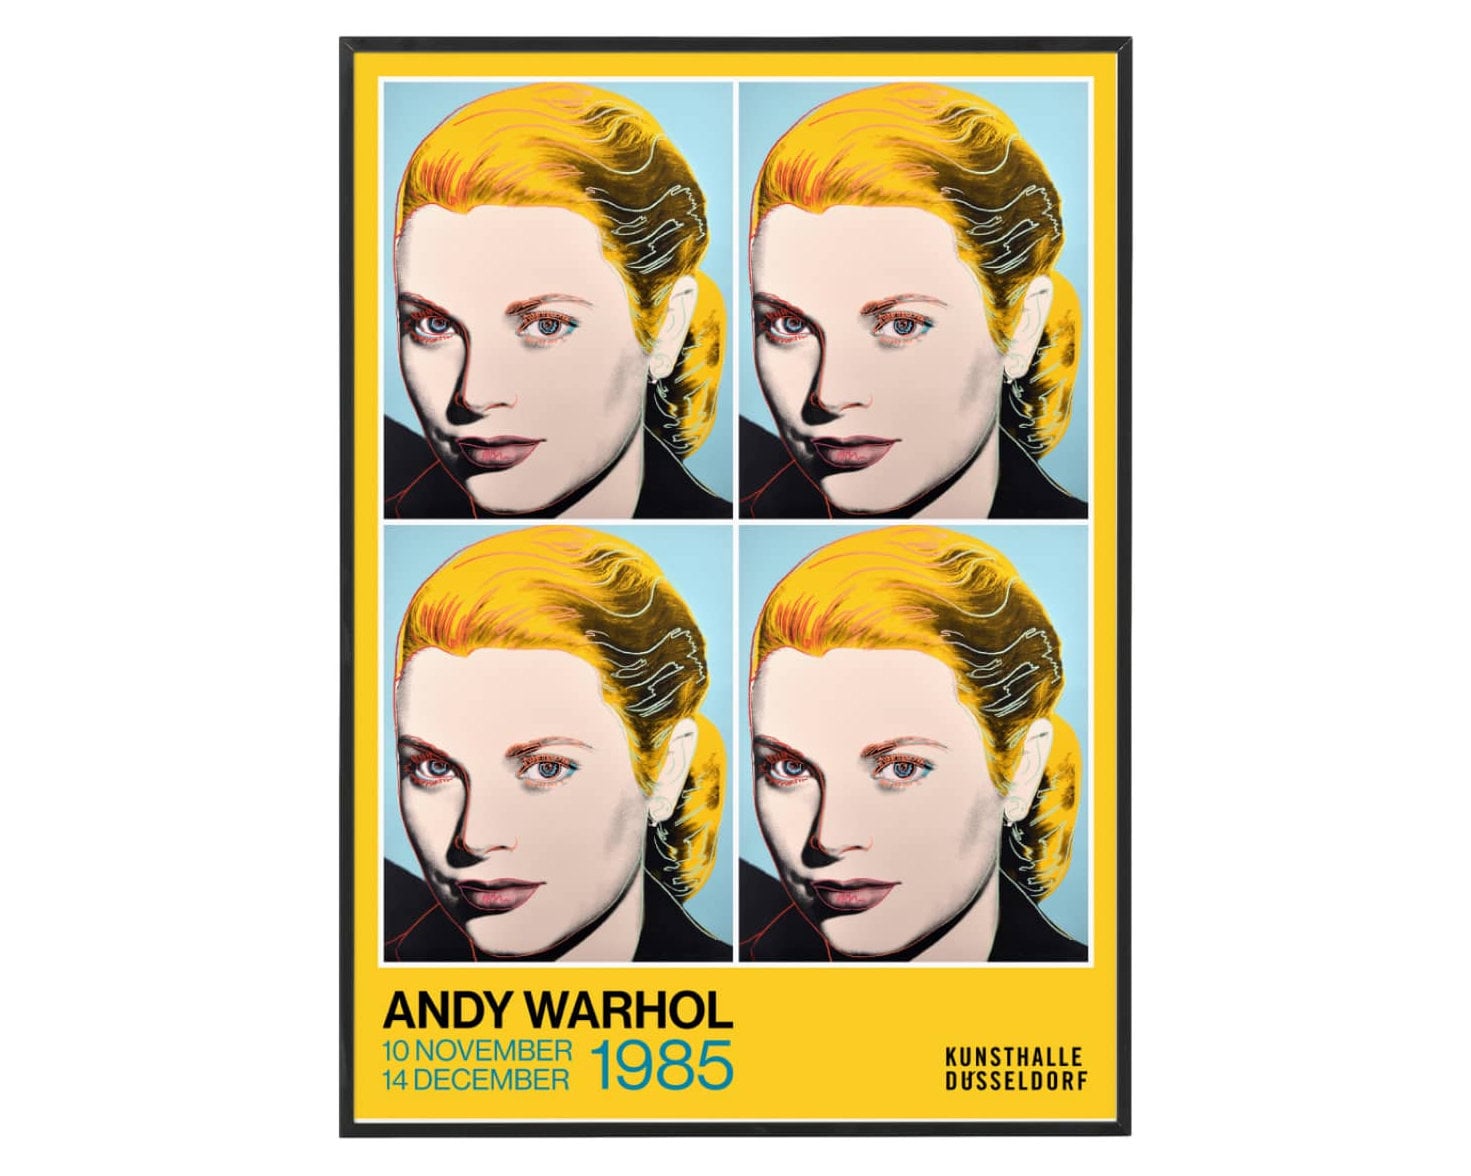 Andy Warhol Grace Kelly Exhibition Poster 1985 Pop Art - Etsy 日本